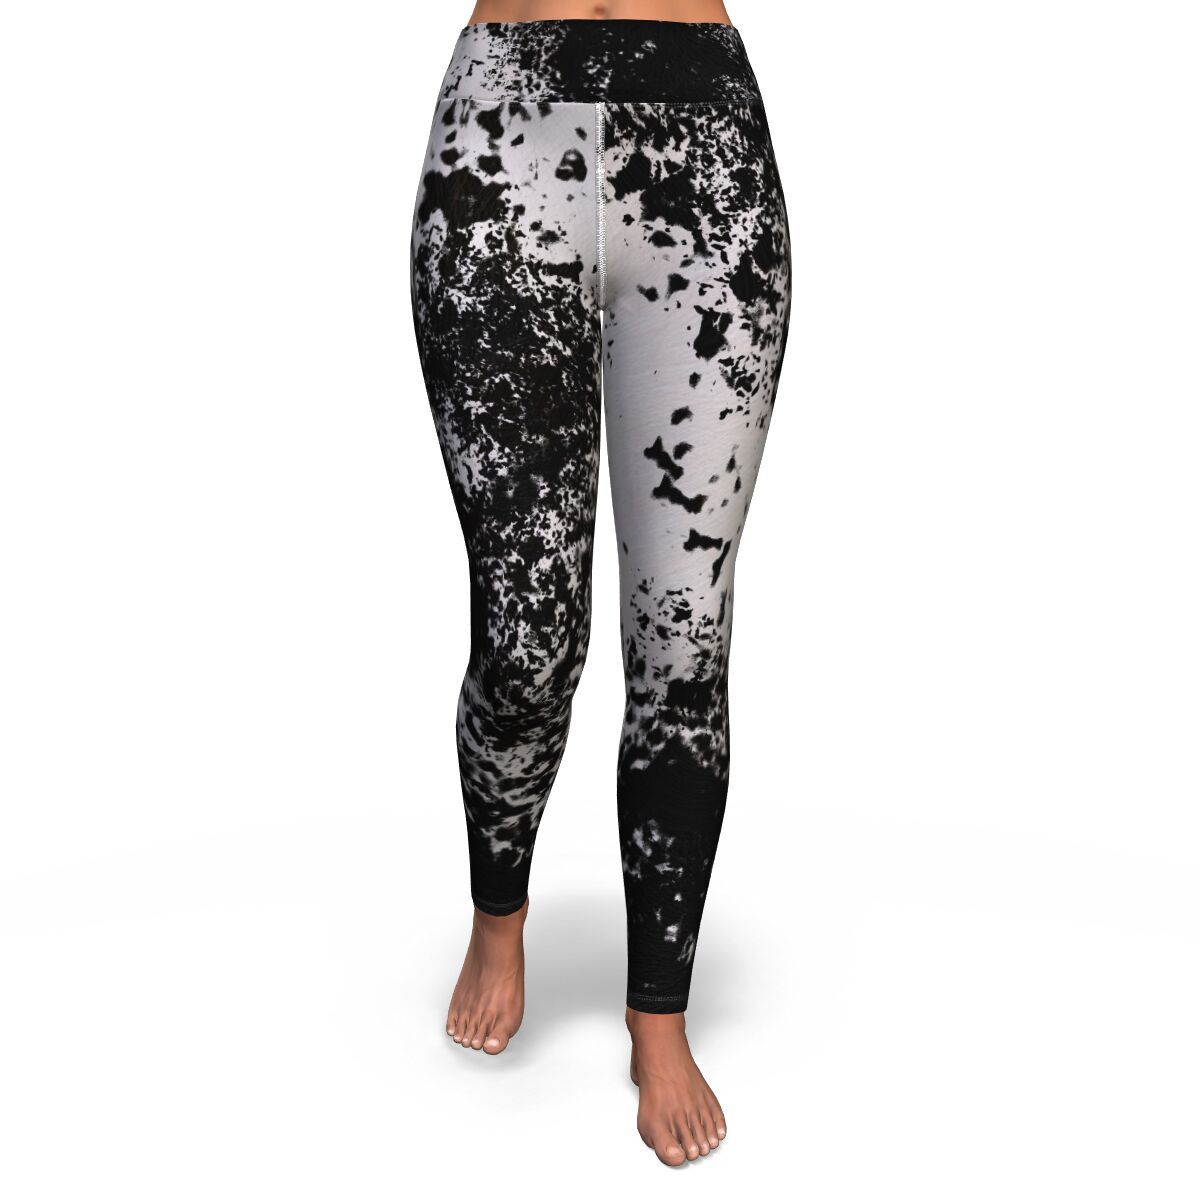 Cow Print Yoga Leggings Black and White CL1211 XS Official COW PRINT Merch